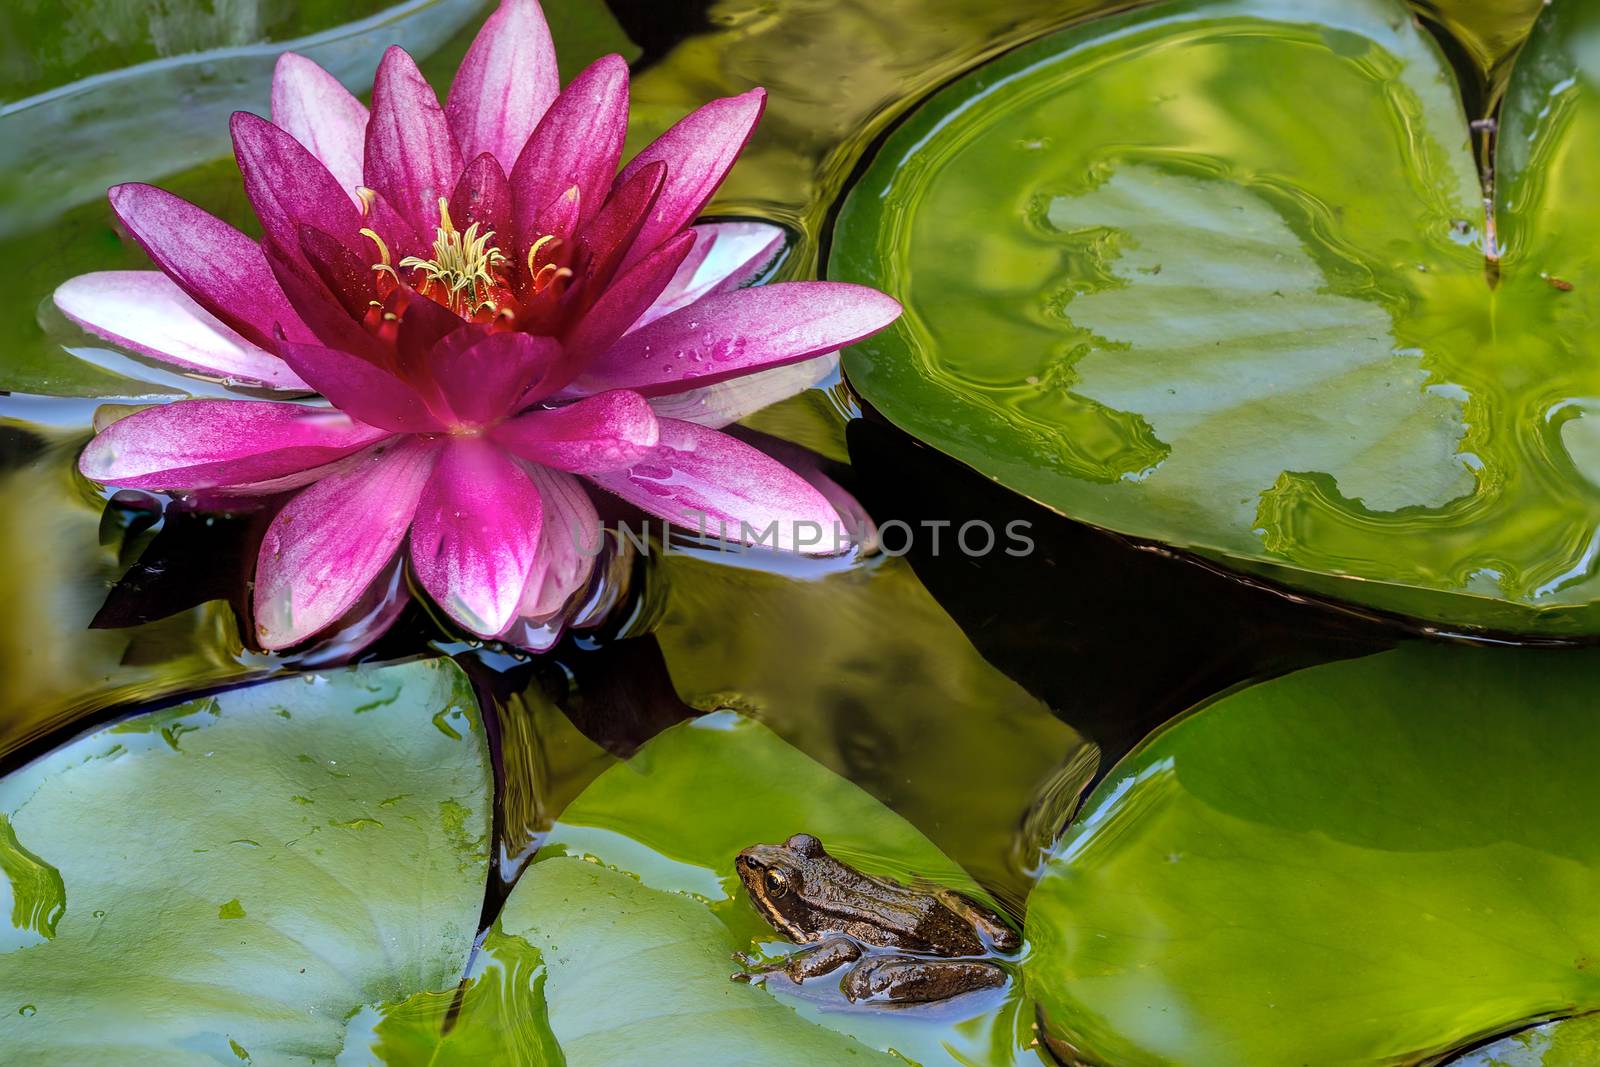 Pacfic Tree Frog Sitting on Water Lily Pad by Pink Flower in Garden backyard pond